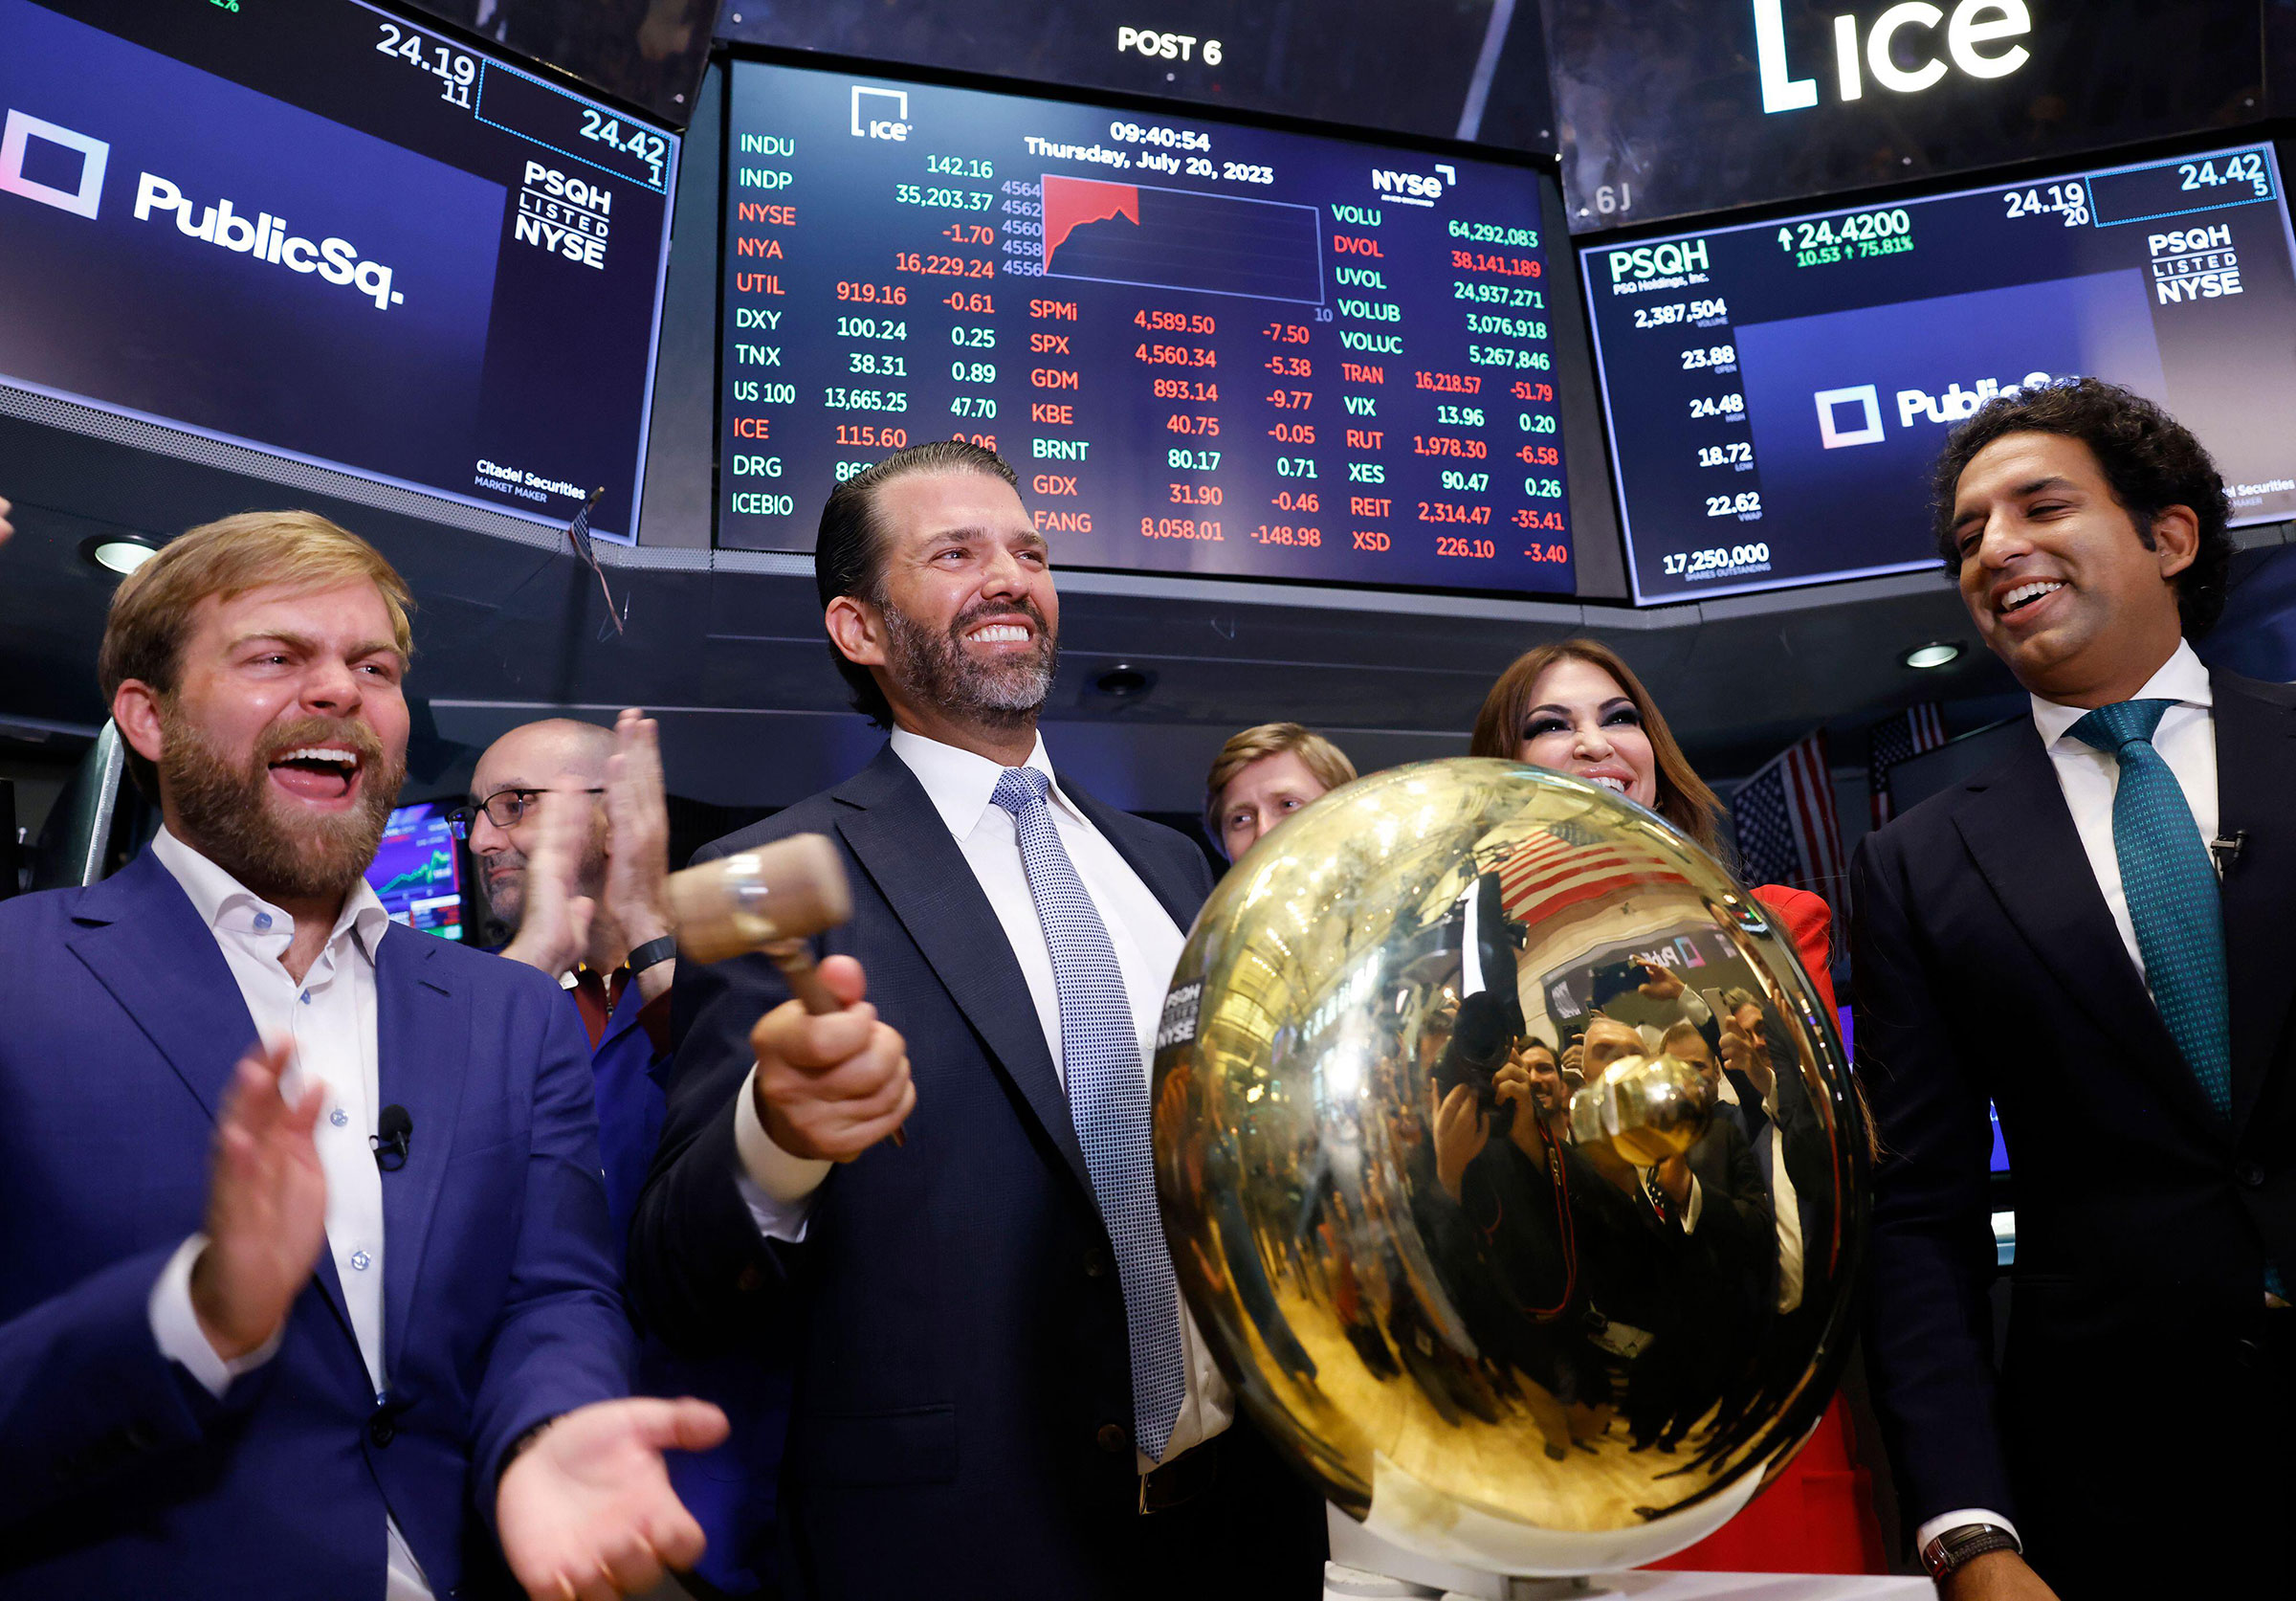 PublicSq. Founder and CEO Michael Seifert, left, Colombier Acquisition Corp. Chairman and CEO Omeed Malik, right, and Donald Trump Jr., center, and Kimberly Guilfoyle ring the ceremonial bell when trading begins for PublicSq. on the floor of the New York Stock Exchange on Wall Street in New York City on Thursday, July 20, 2023.